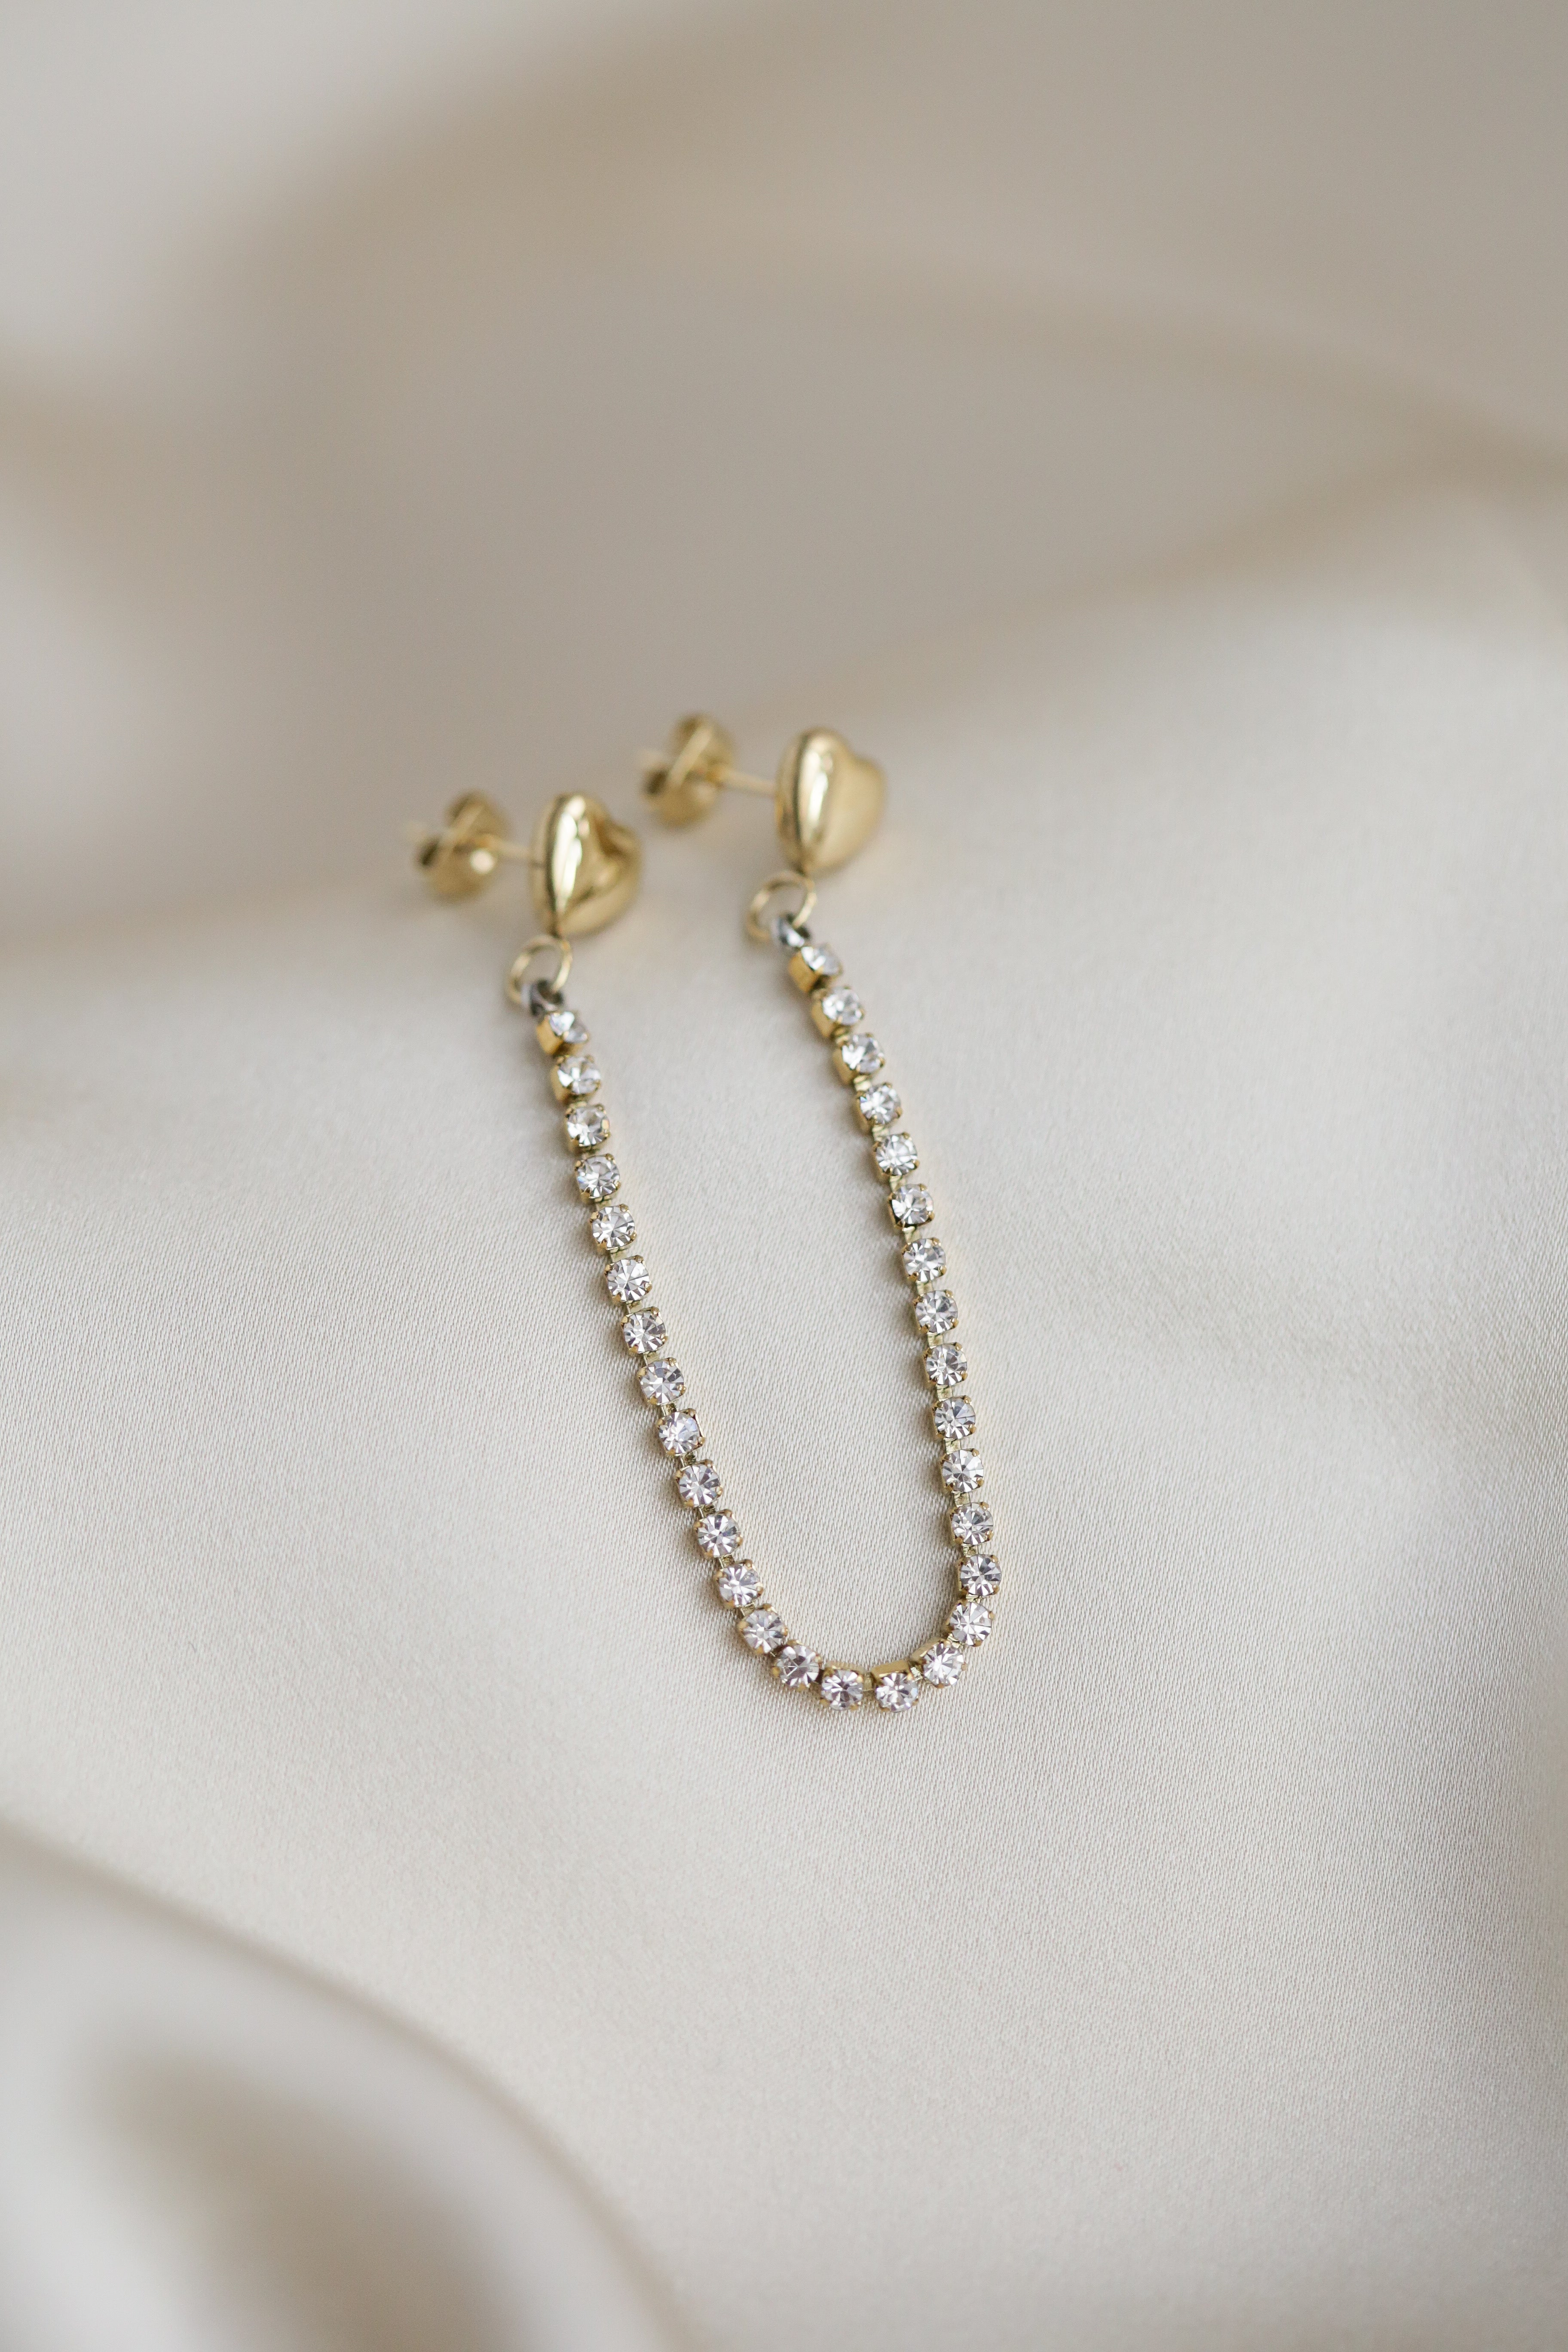 The Heart - Double Studs - Boutique Minimaliste has waterproof, durable, elegant and vintage inspired jewelry